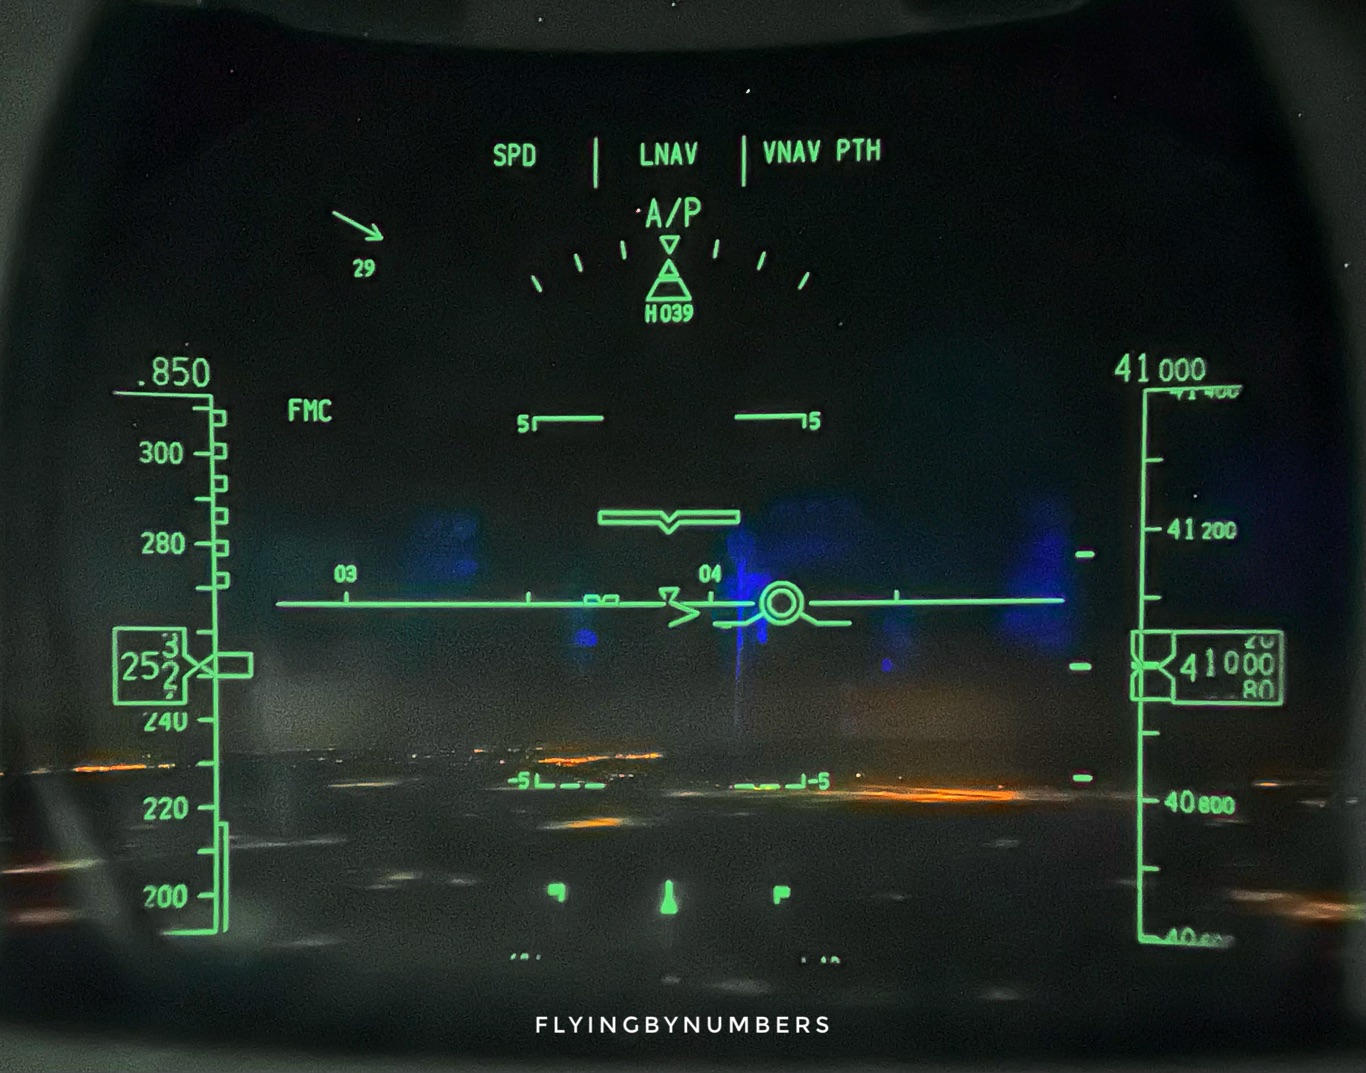 787 Dreamliner head up display (HUD) during the cruise